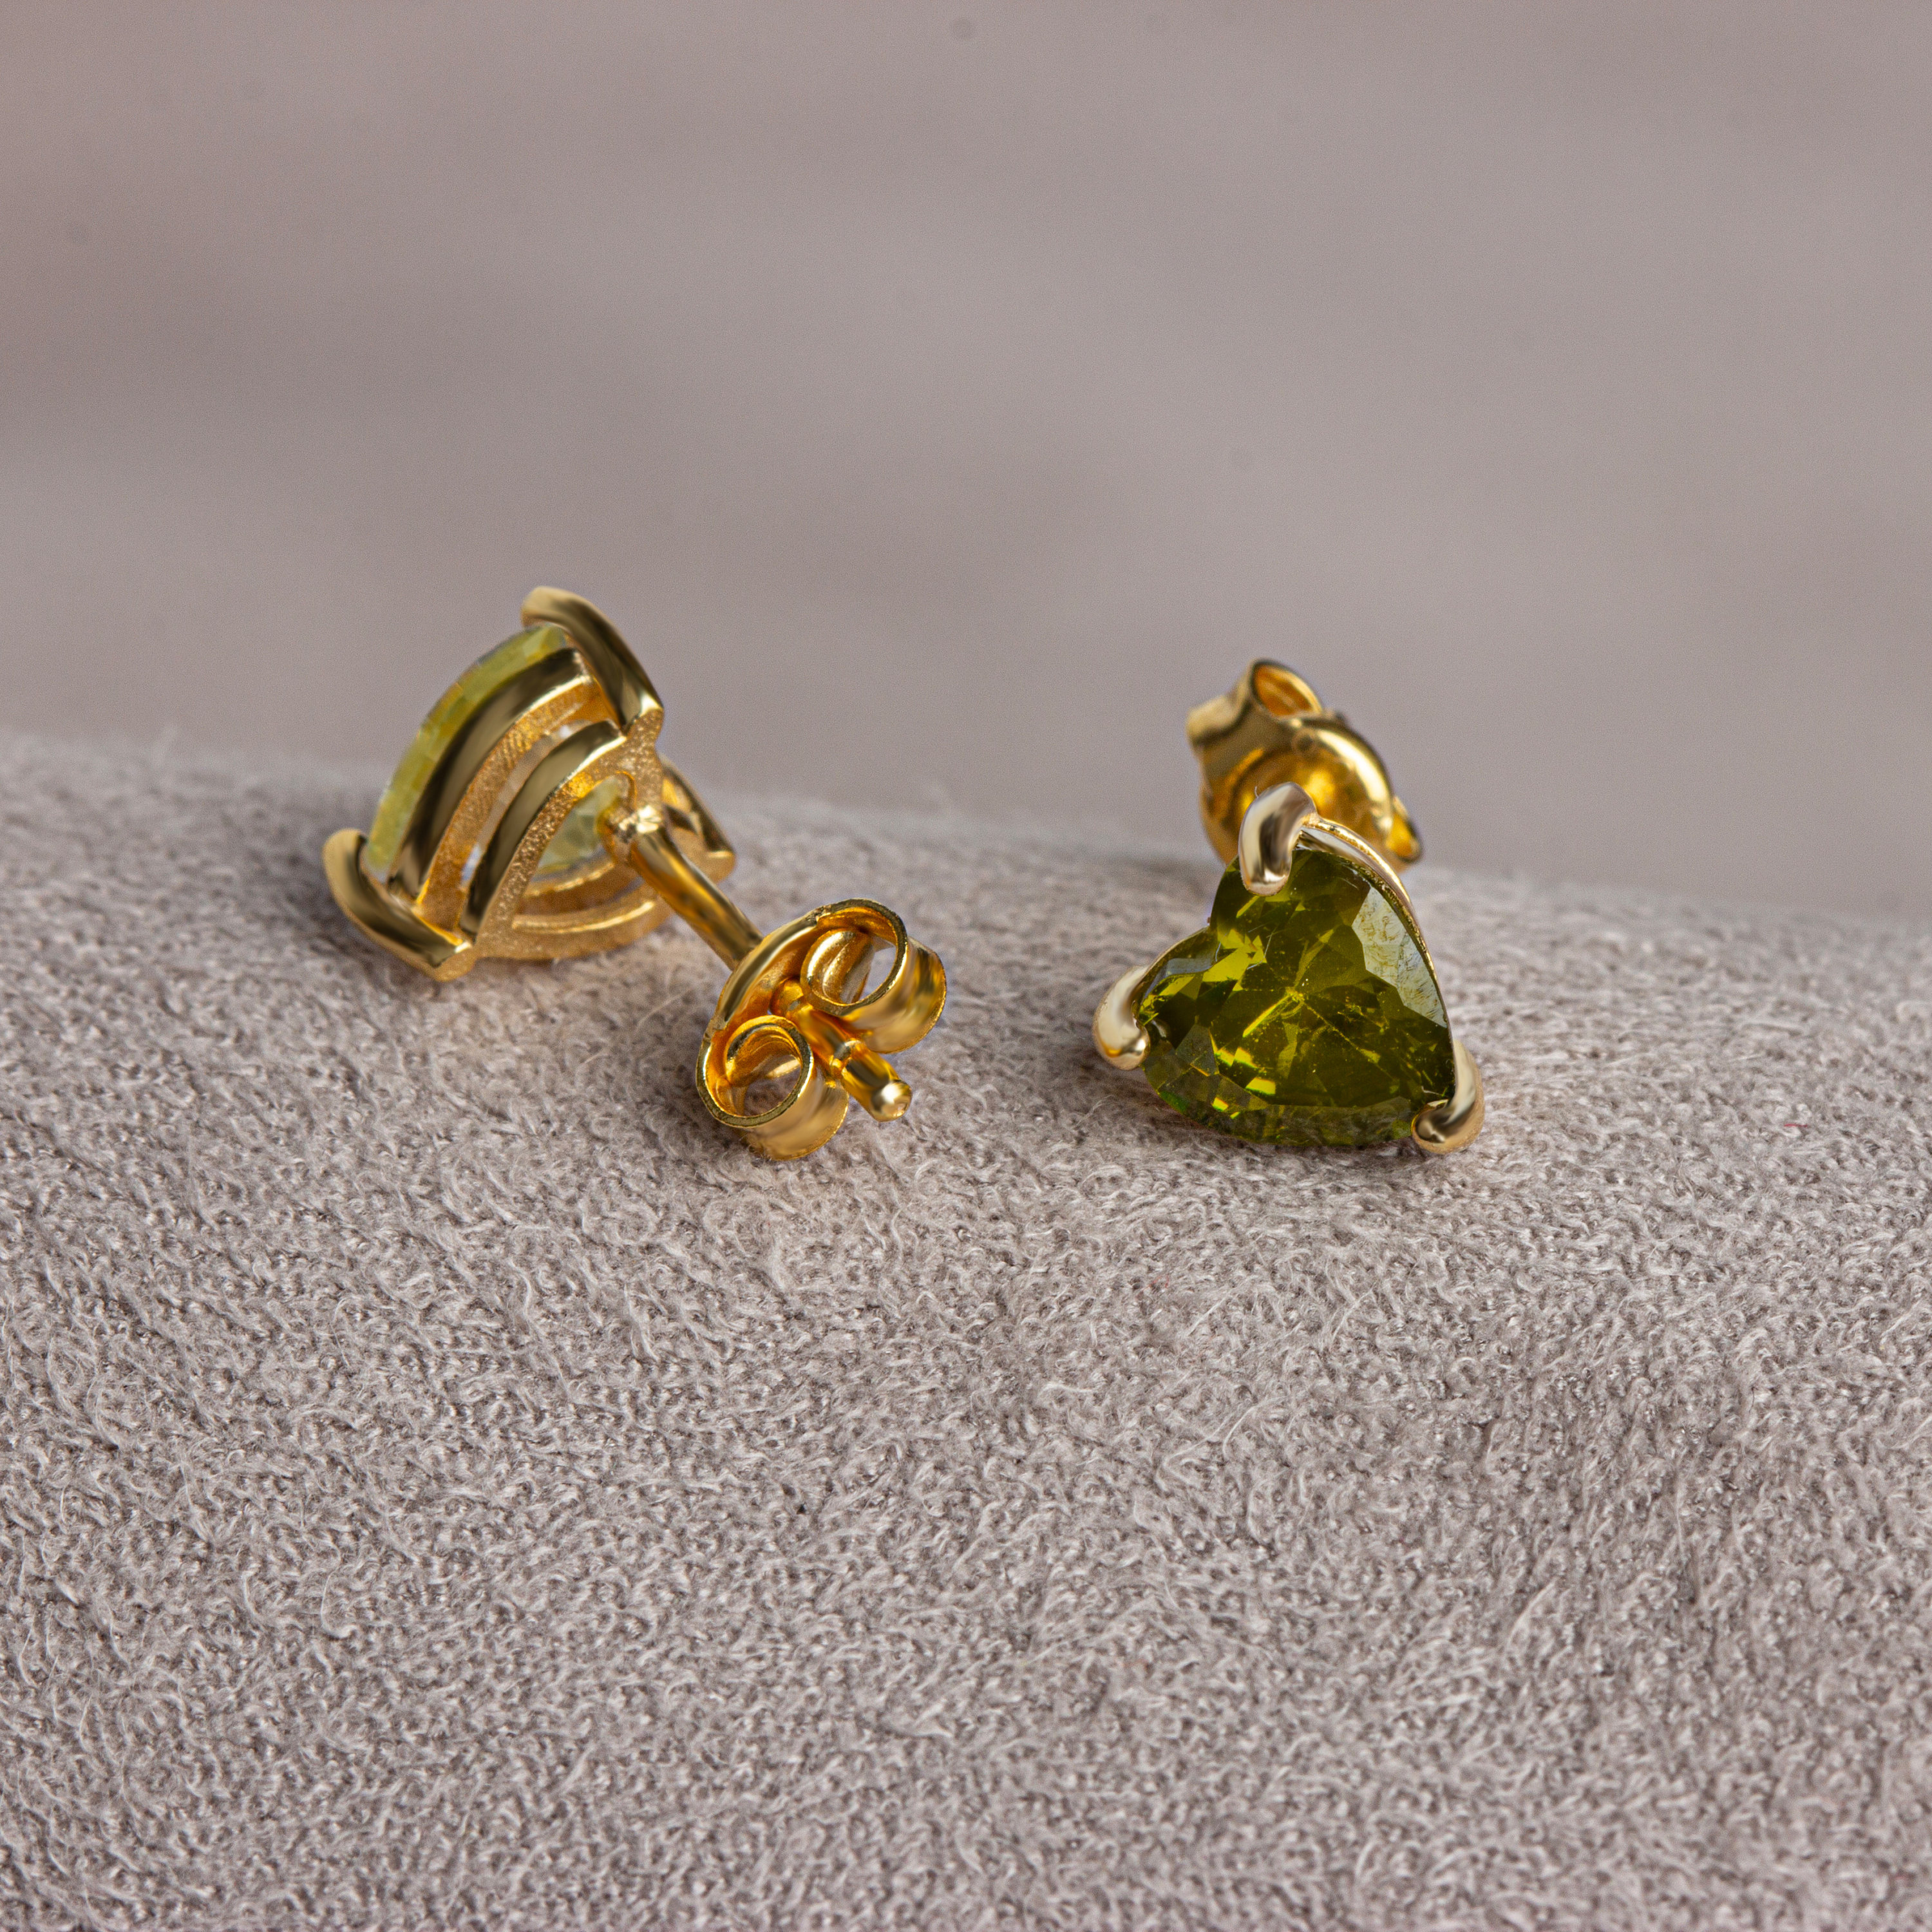 14K Solid Gold Peridot Earring August Birthstone Colors Screw